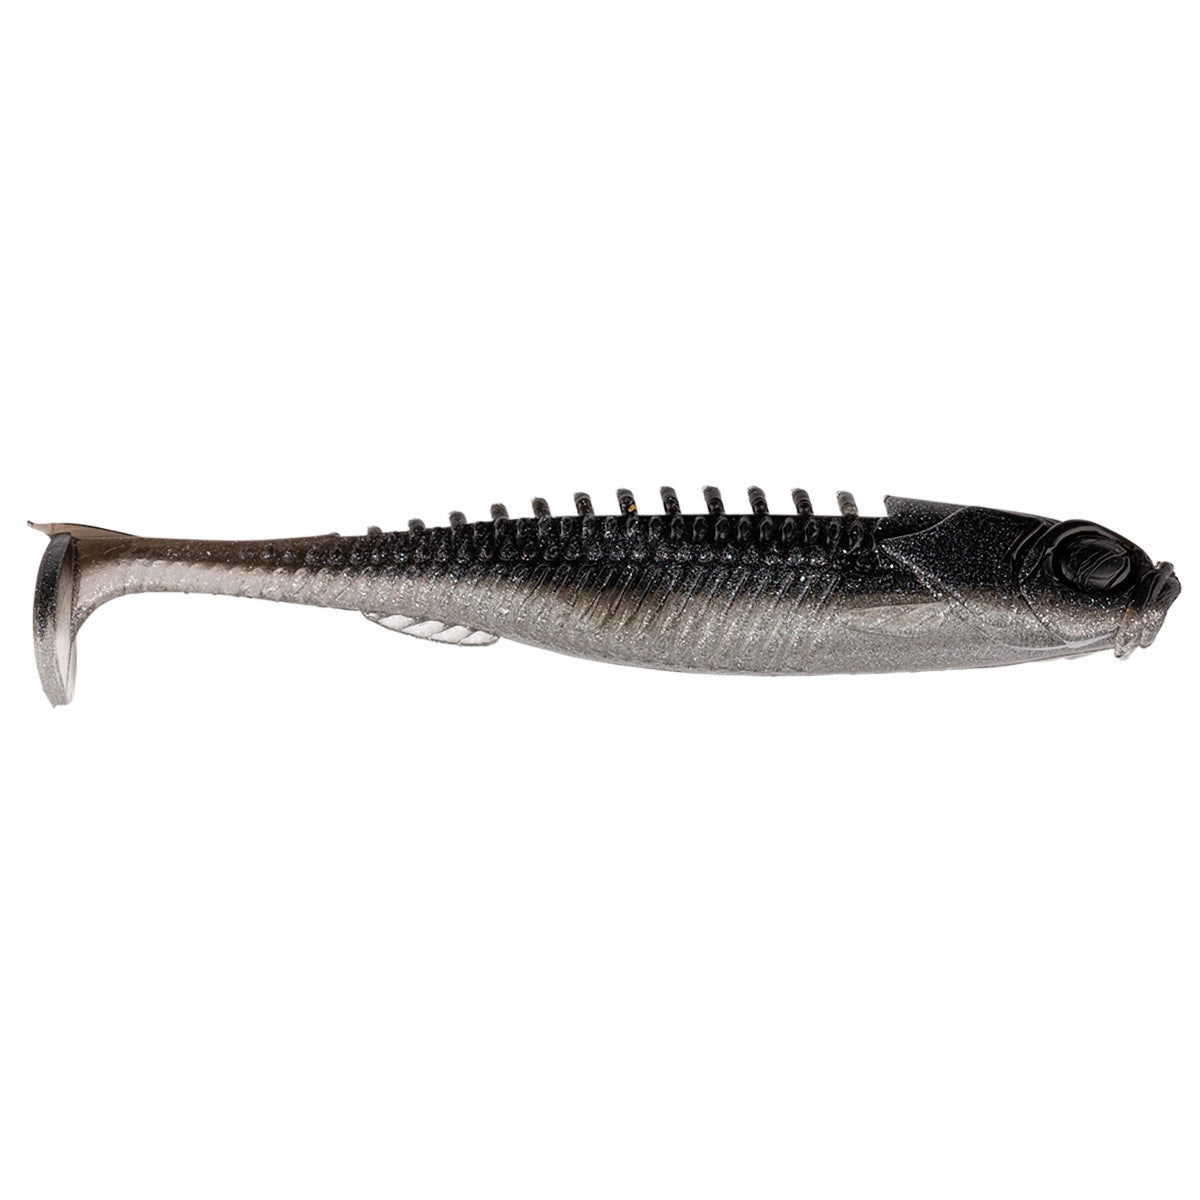 NGC Sports Kick Tail XL Fishing Lure 7” Floater Chocolate Shad